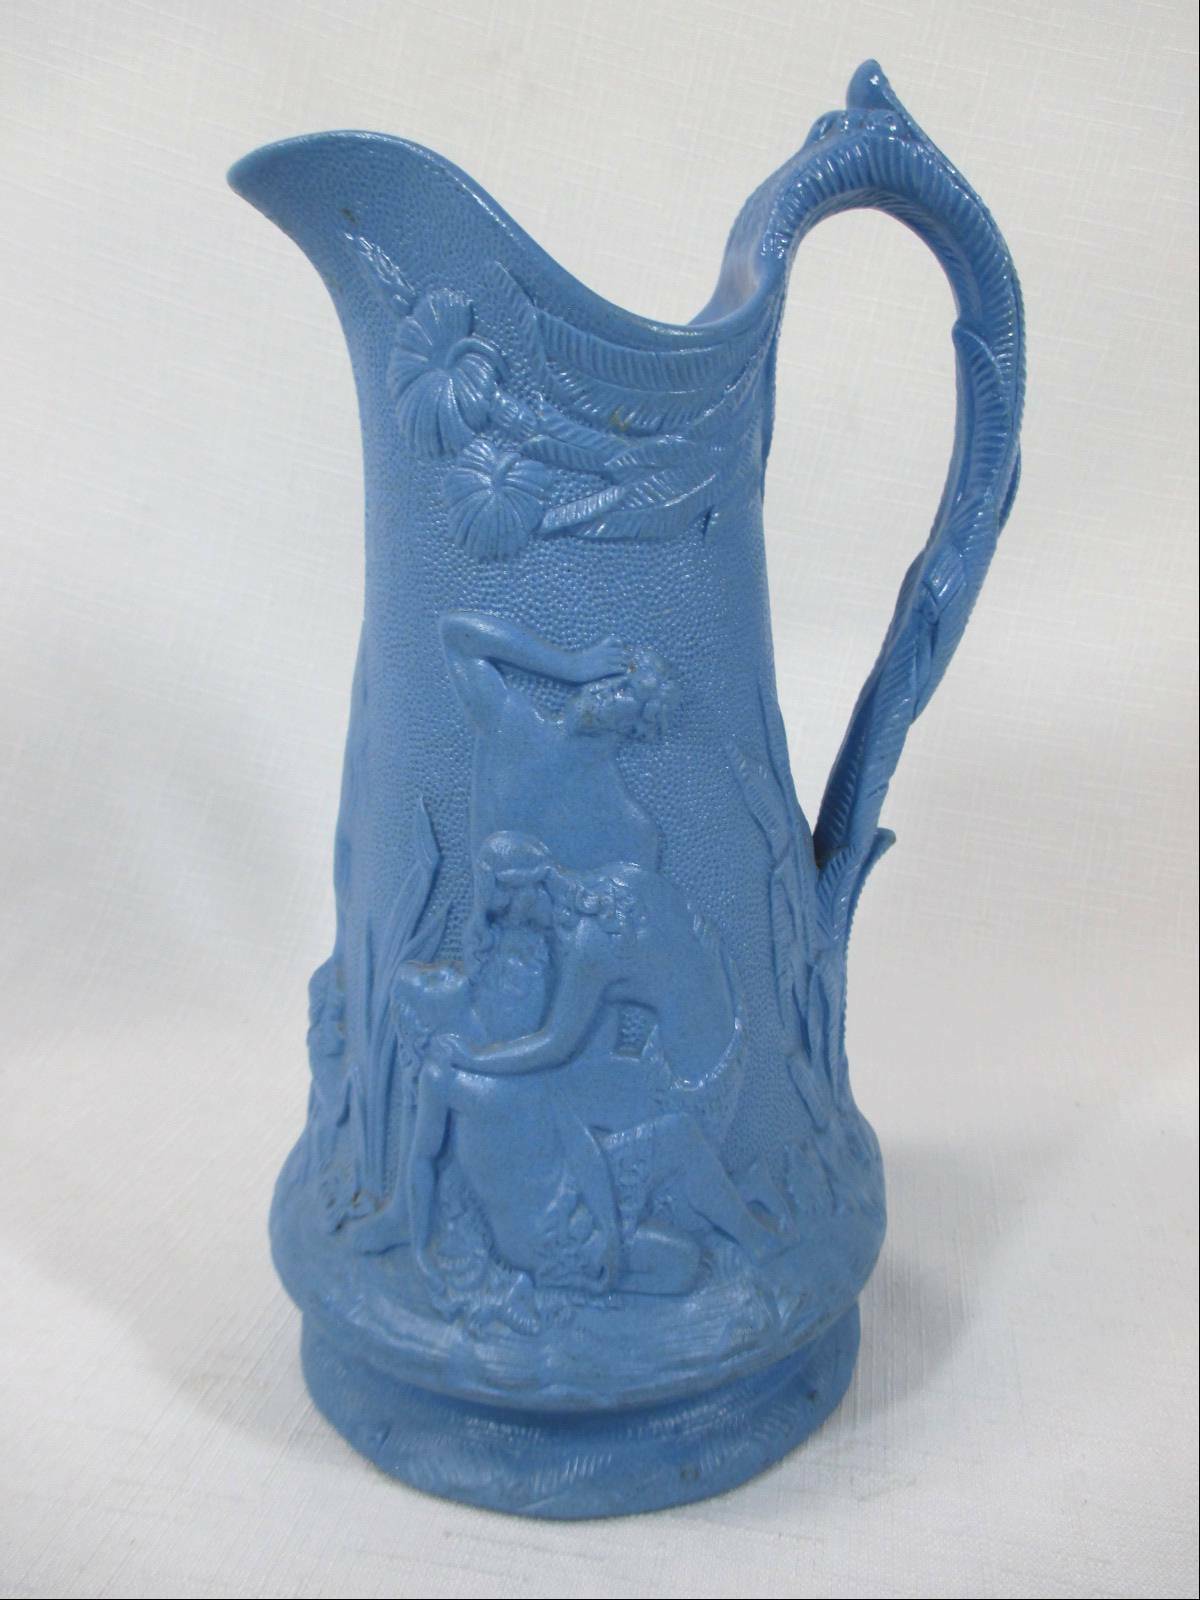 ENGLISH STAFFORDSHIRE MOLDED PITCHER / JUG CAIN & ABLE IN RICH BLUE